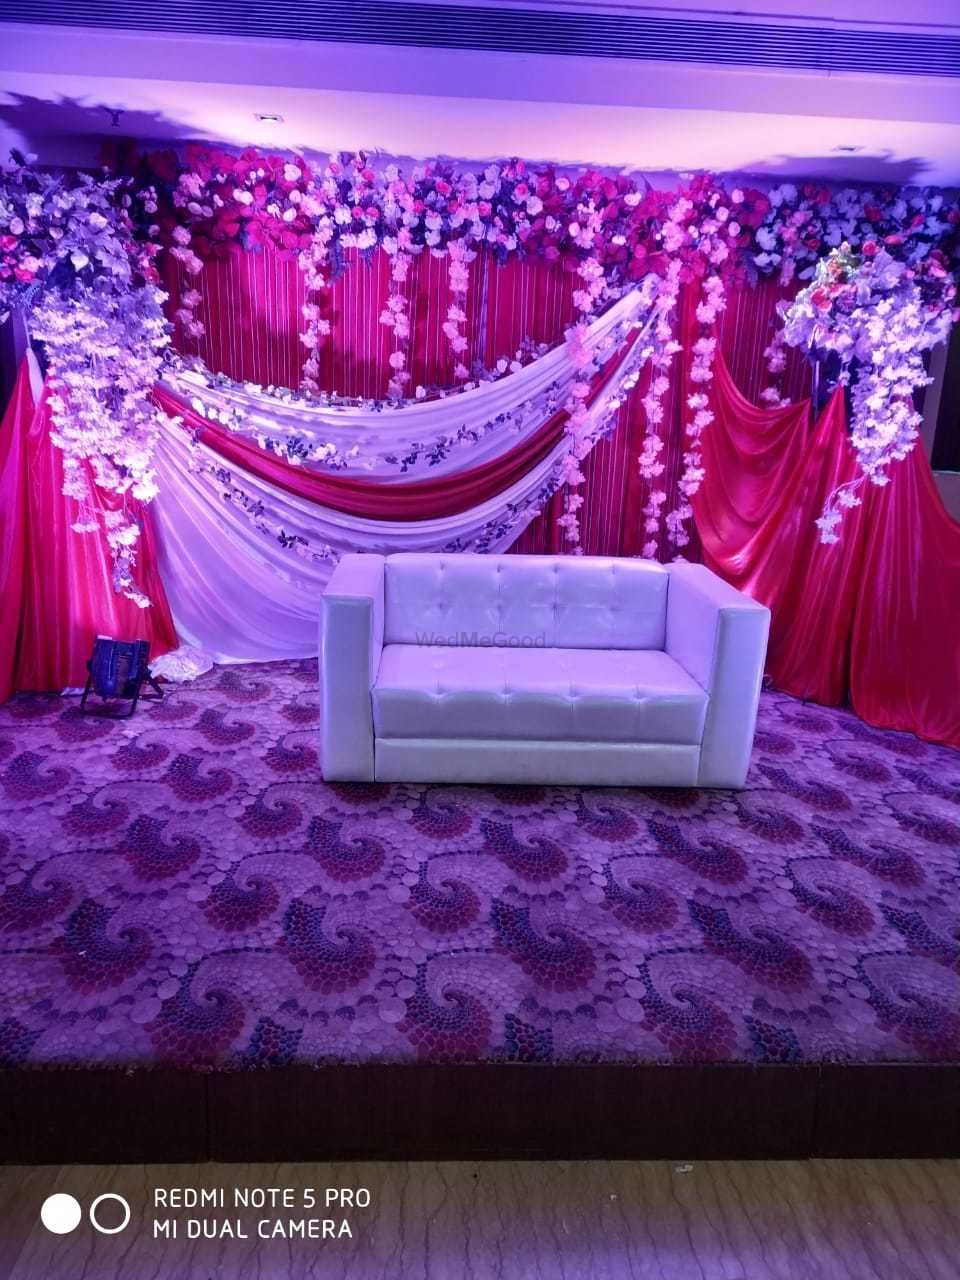 Photo By Country Inn & Suites by Radisson Amritsar - Venues